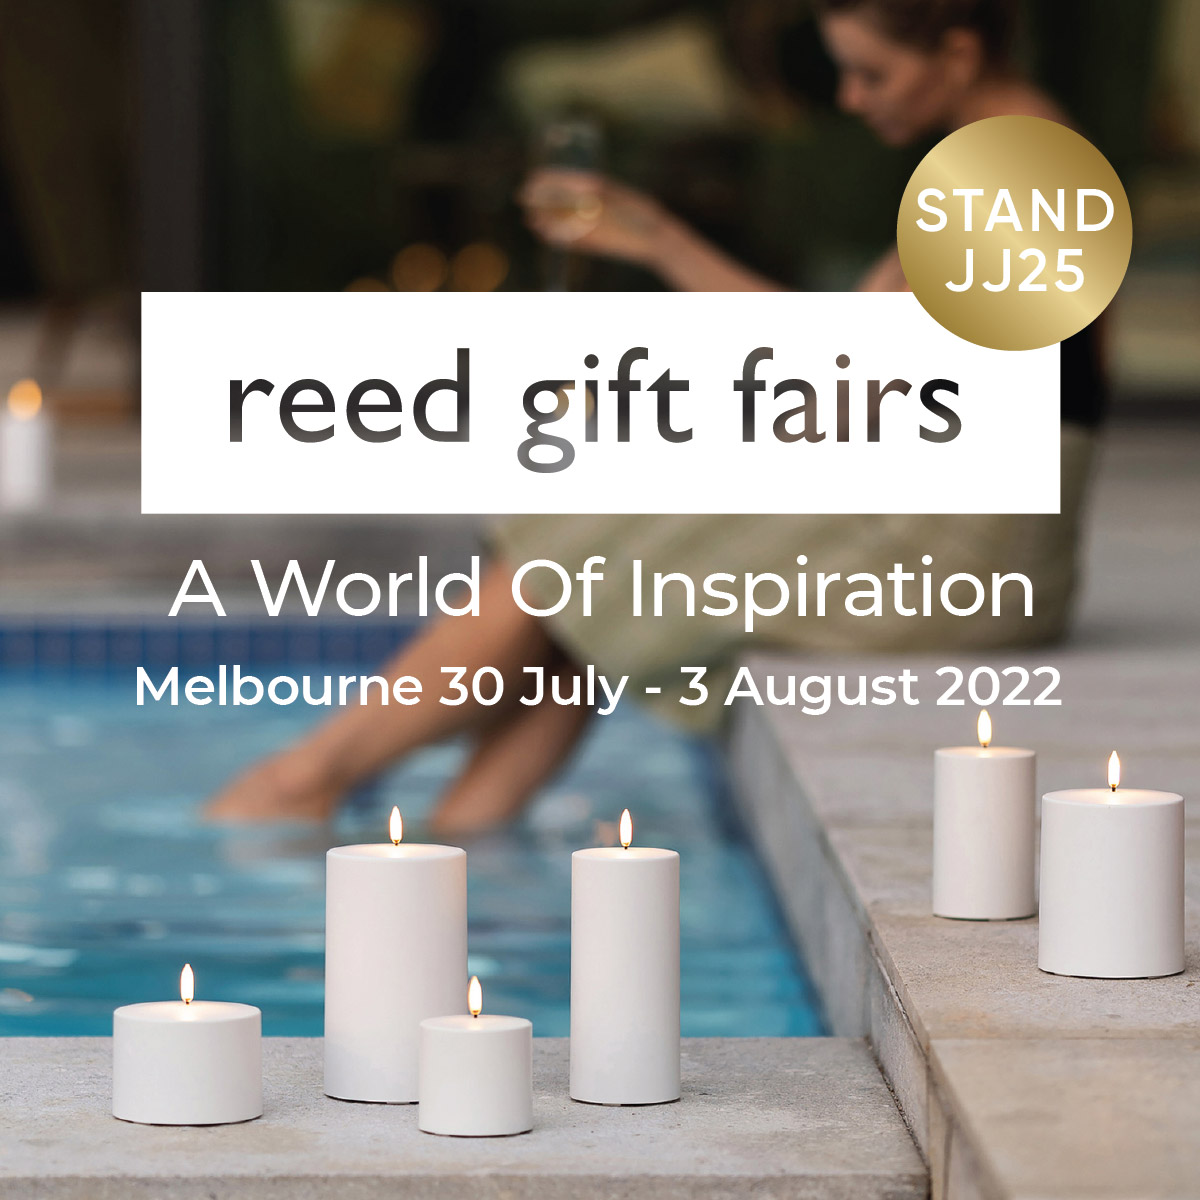 See us at Reed Gift Fair Melbourne